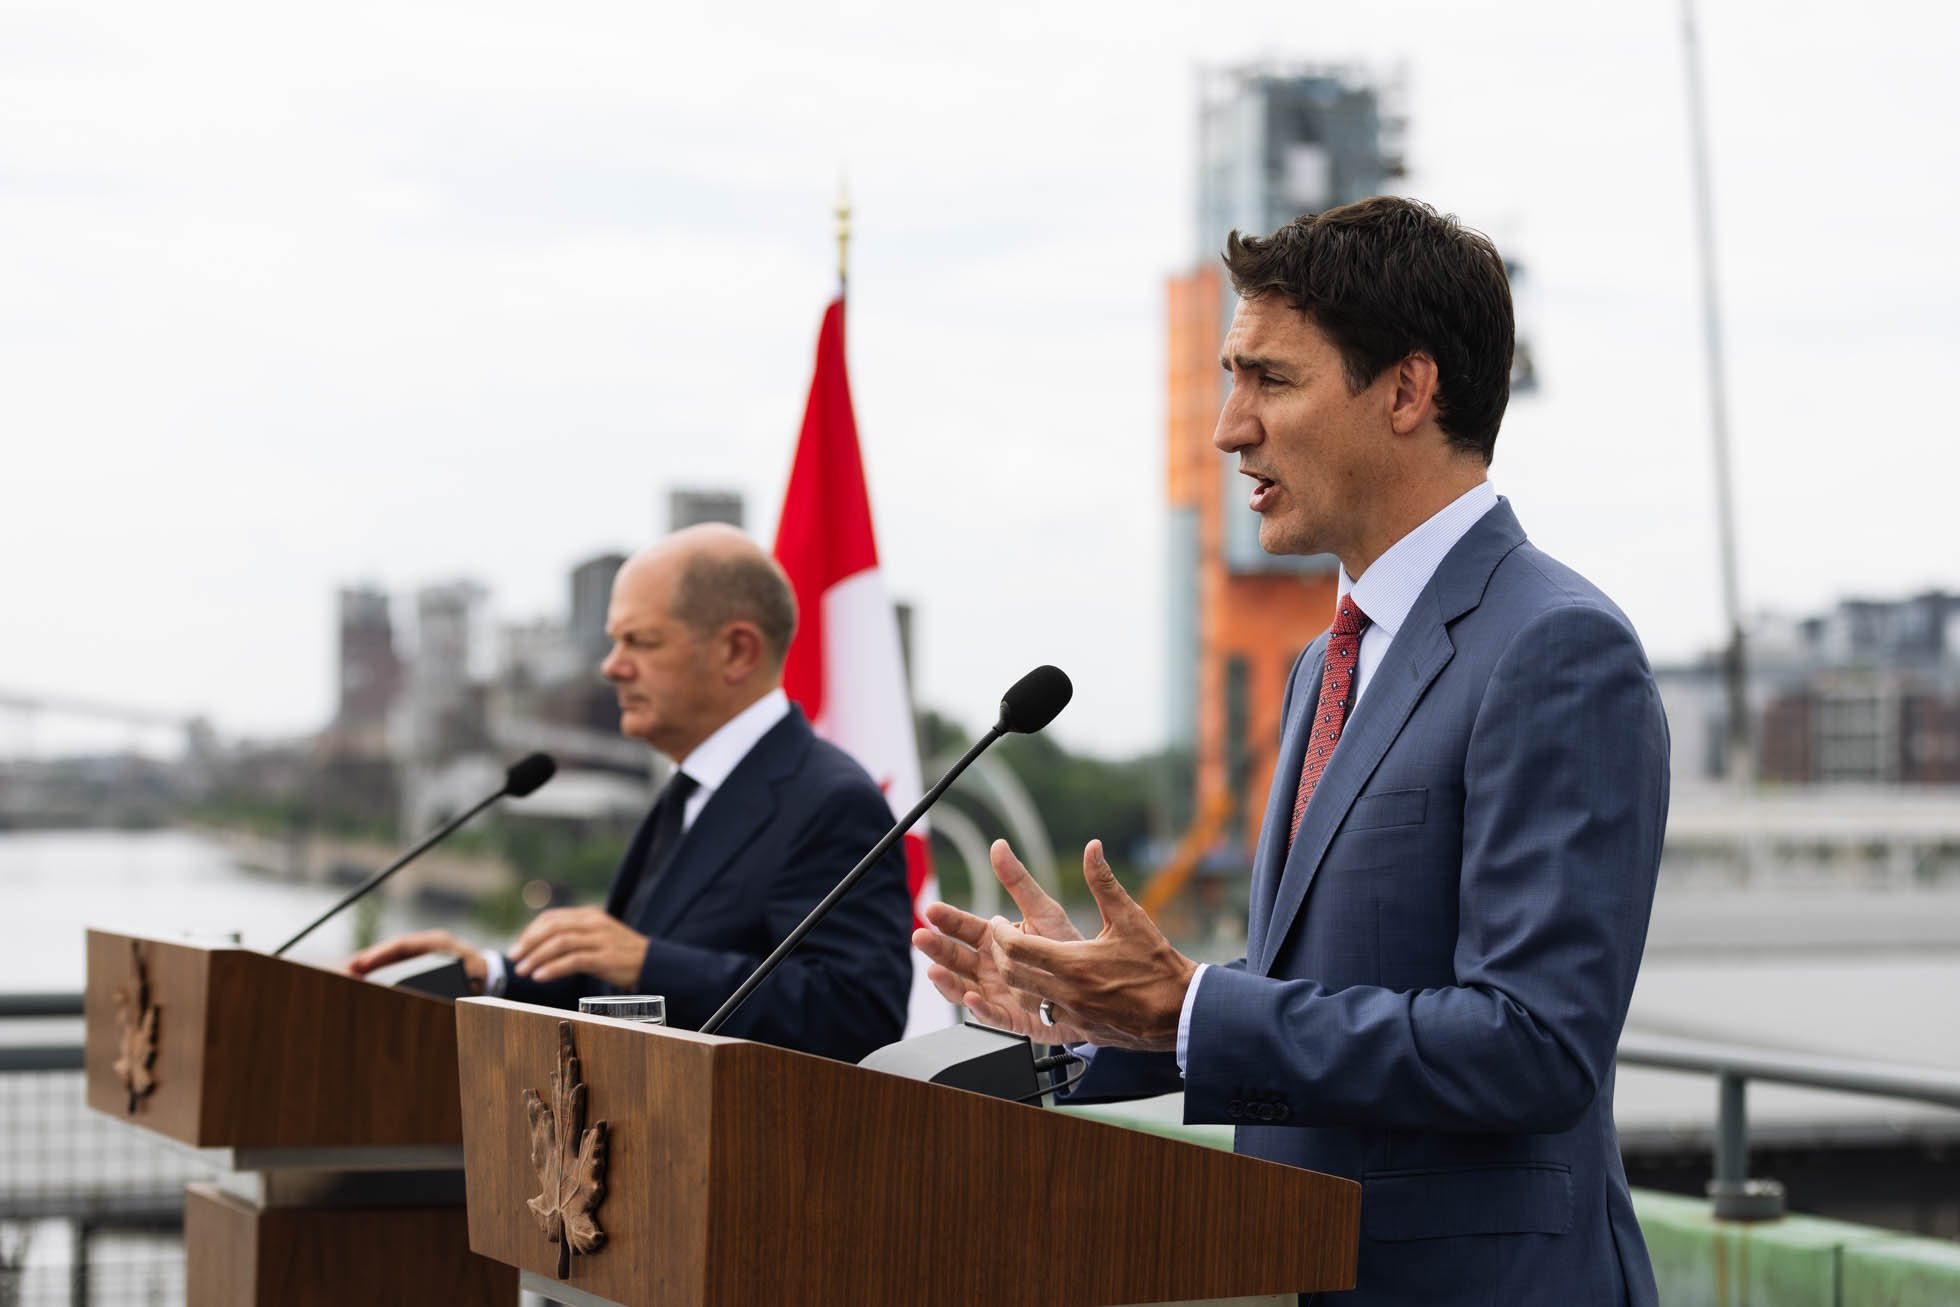  Canadian Prime Minister Justin Trudeau and German Chancellor Olaf Scholz meet at a press conference in Montréal, Québec to discuss energy trades between the two countries. (The Narwhal 2022) 